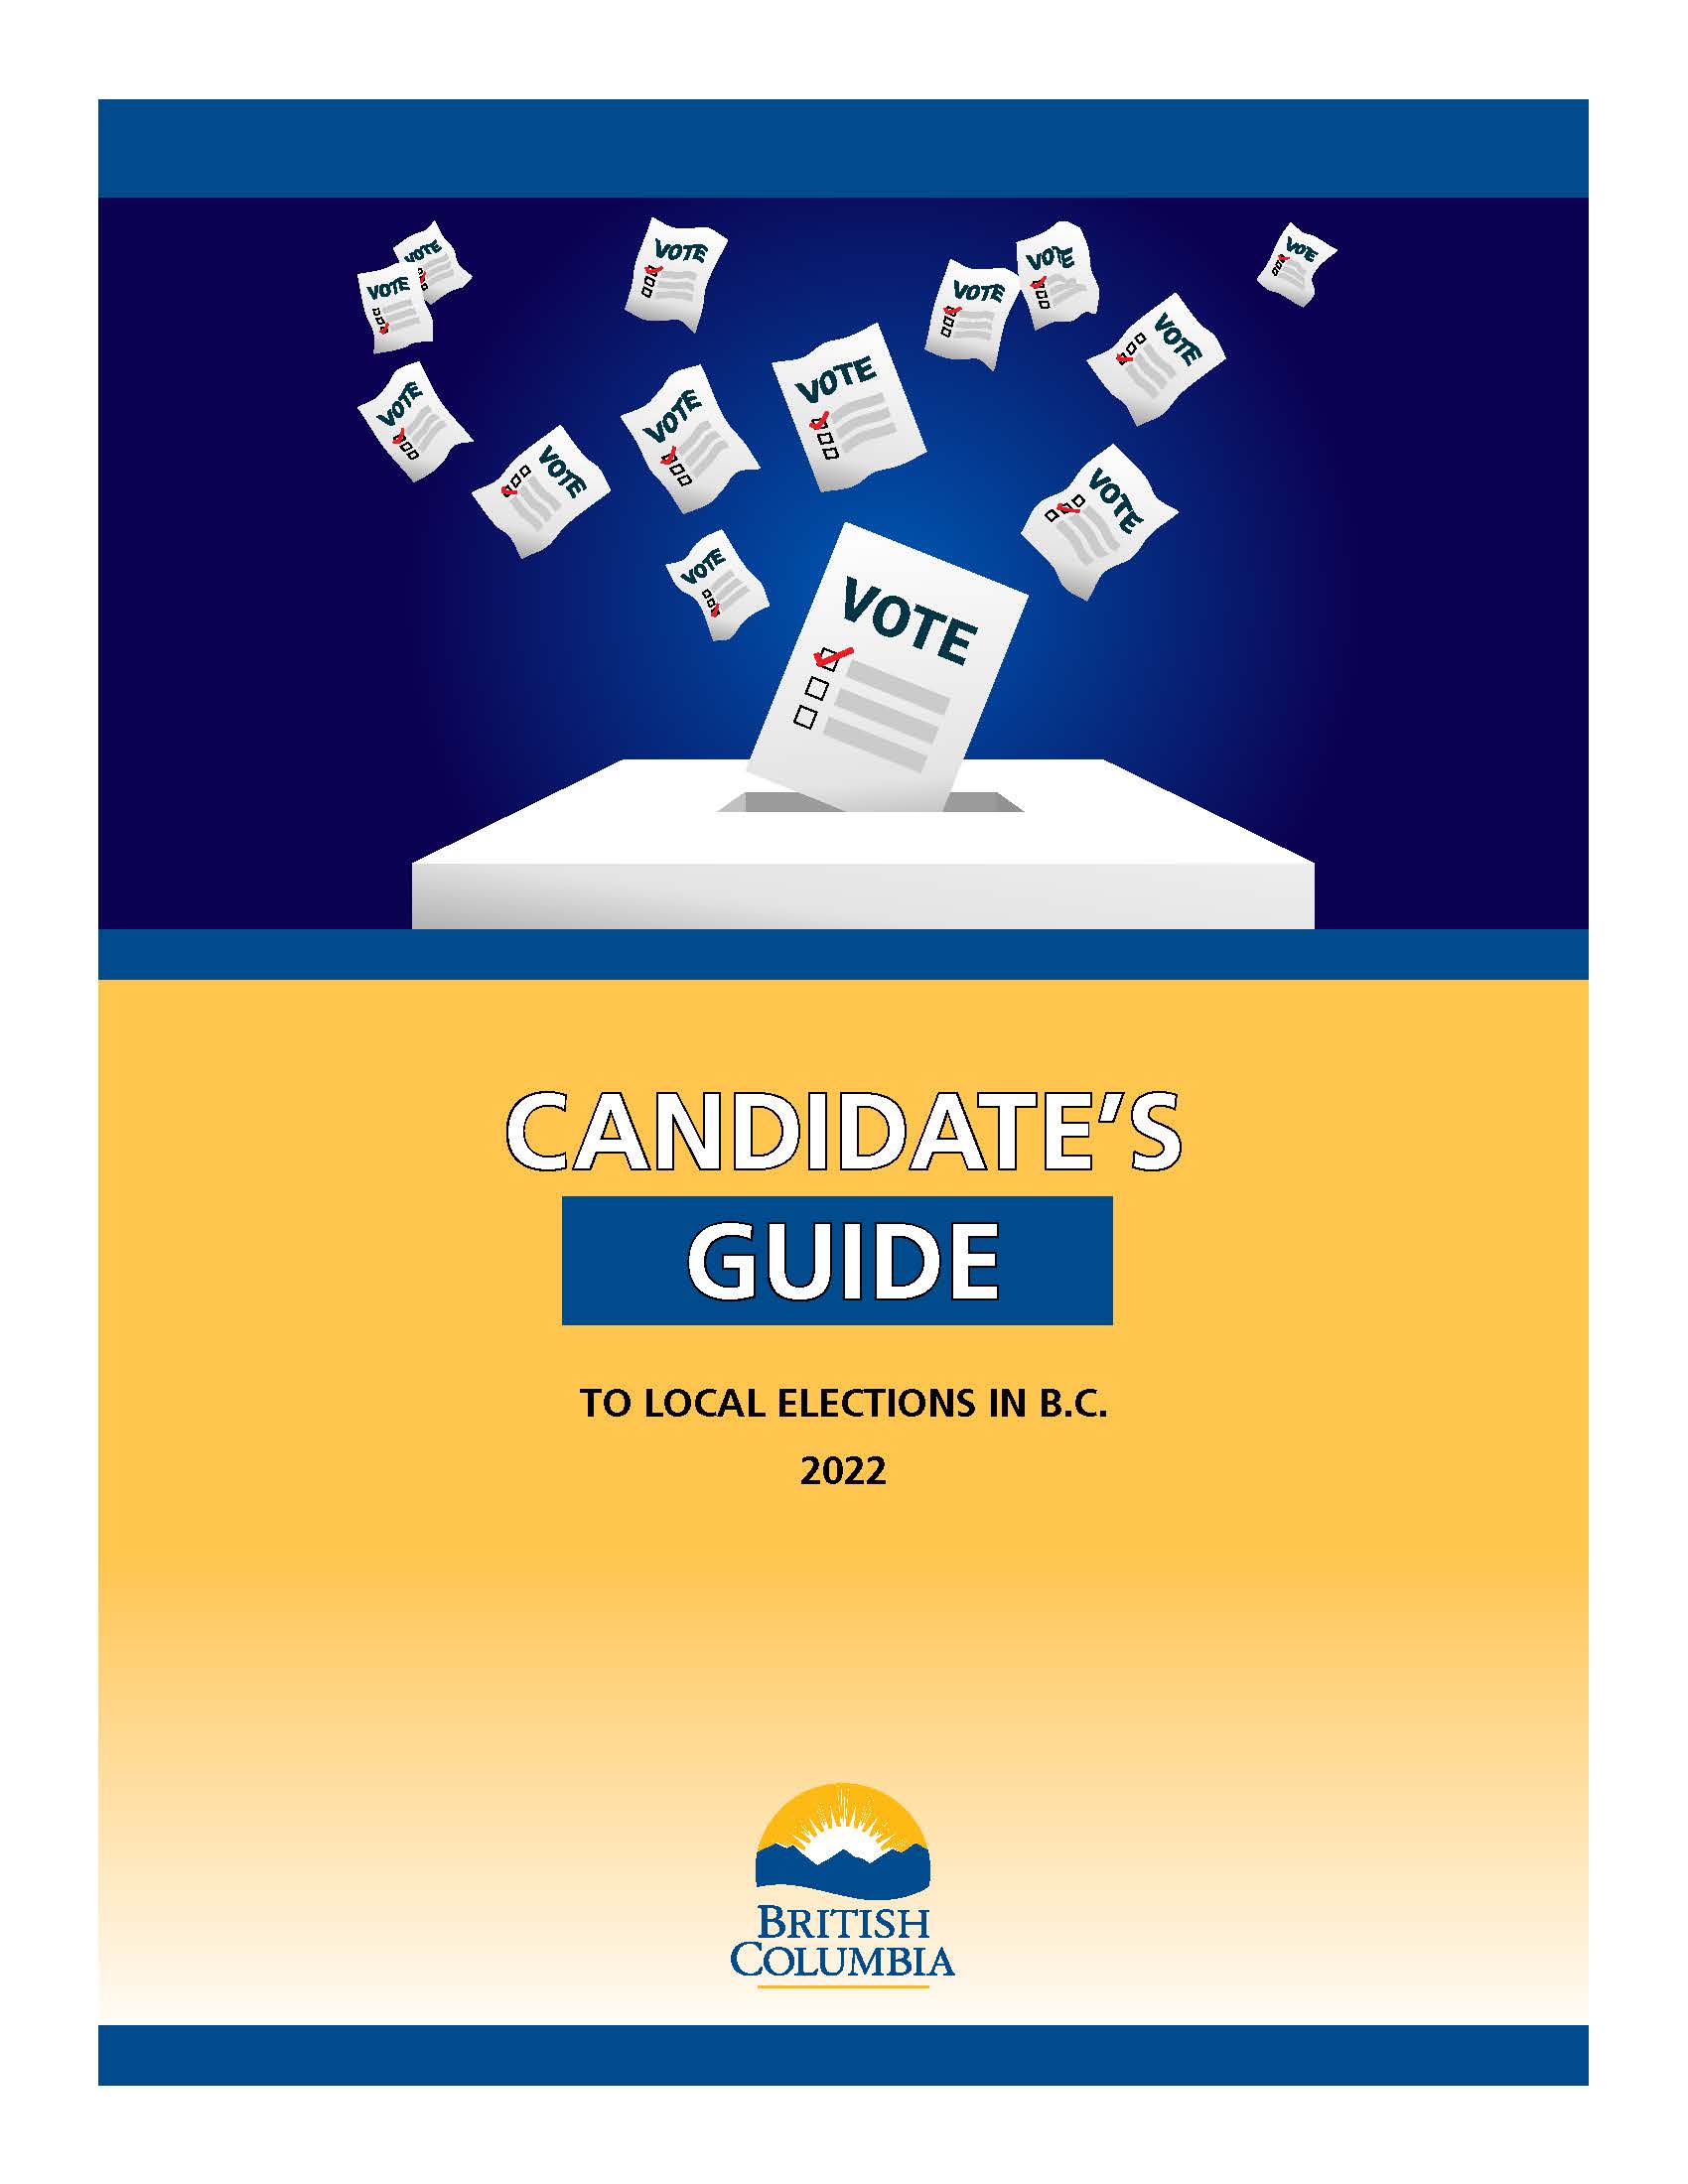 Candidate's Guide To Local Elections in B.C